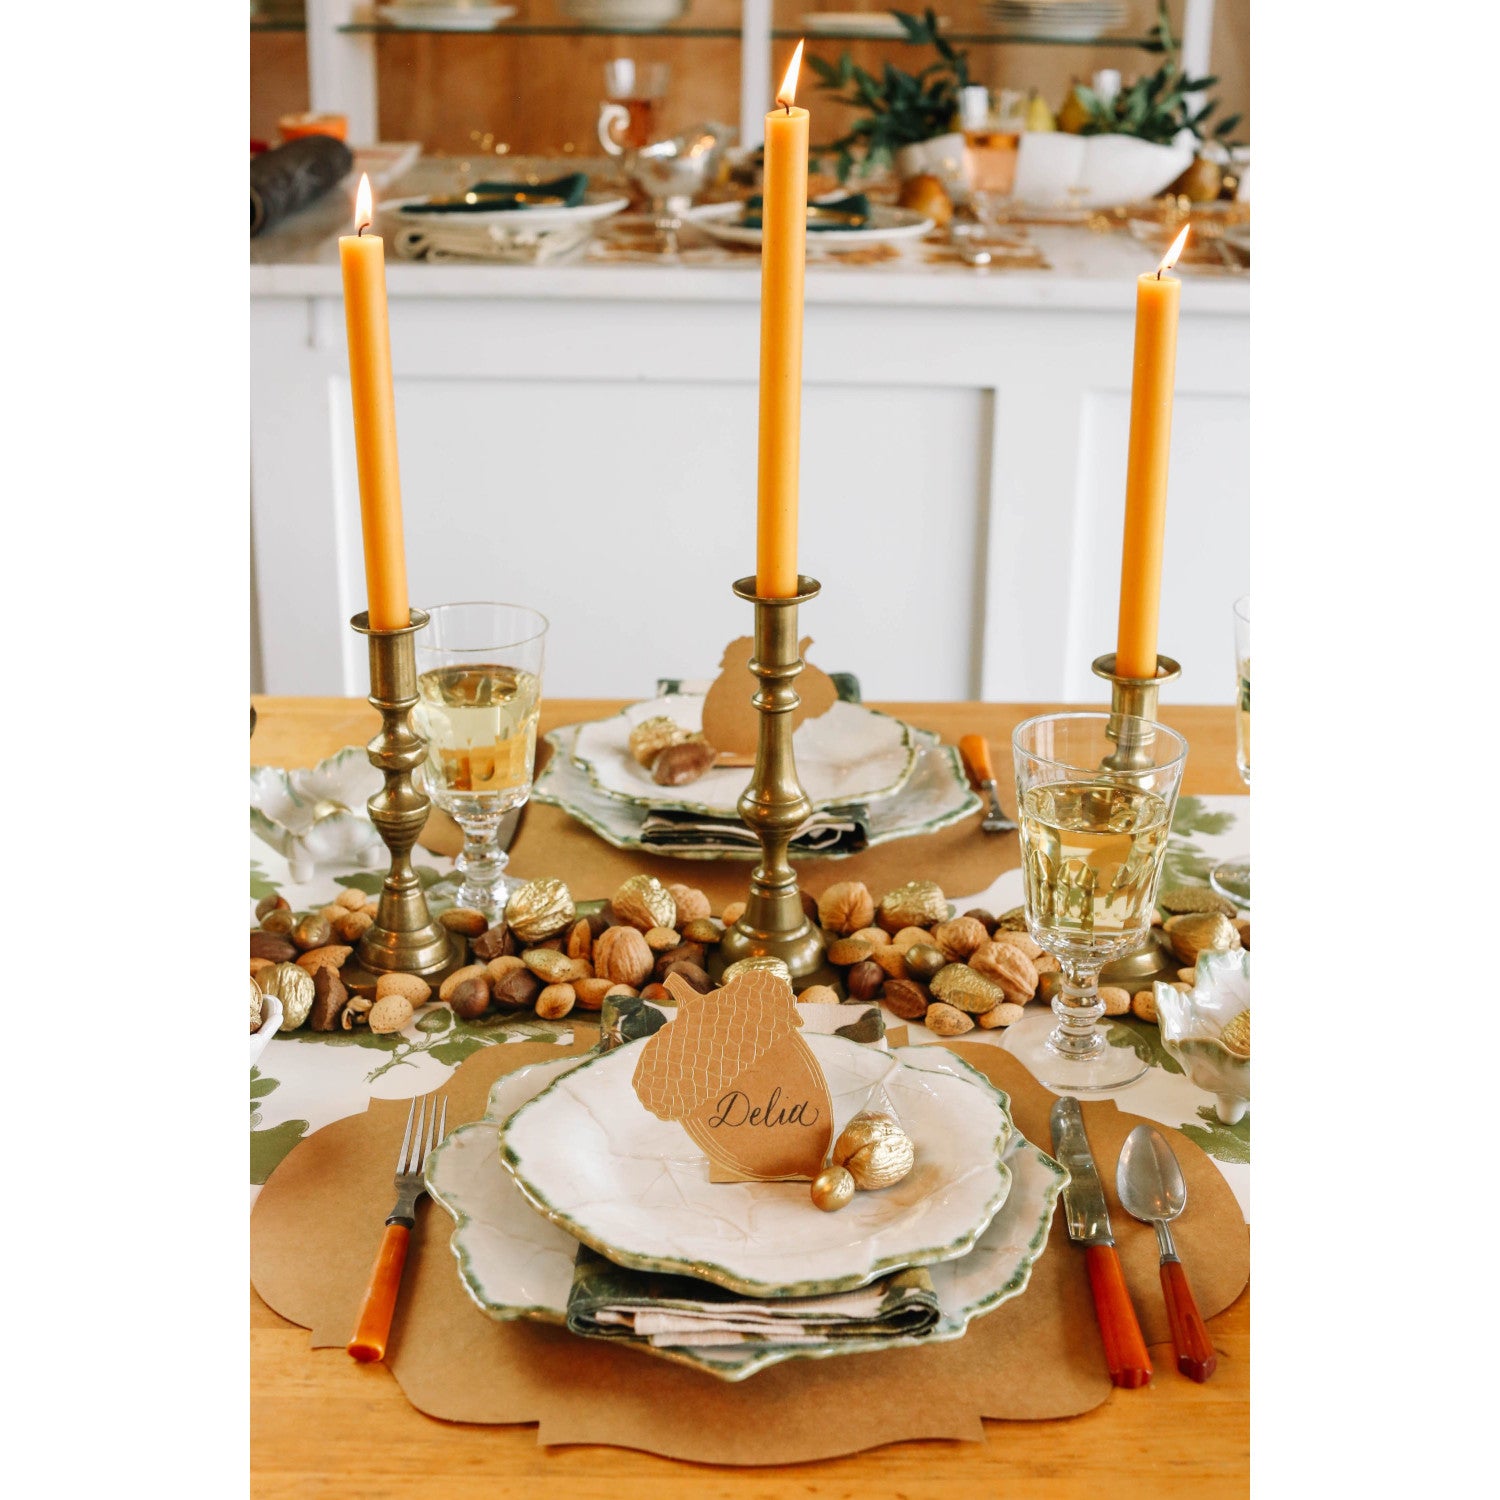 An elegant fall-themed table setting with Acorn Place Cards on the plates.